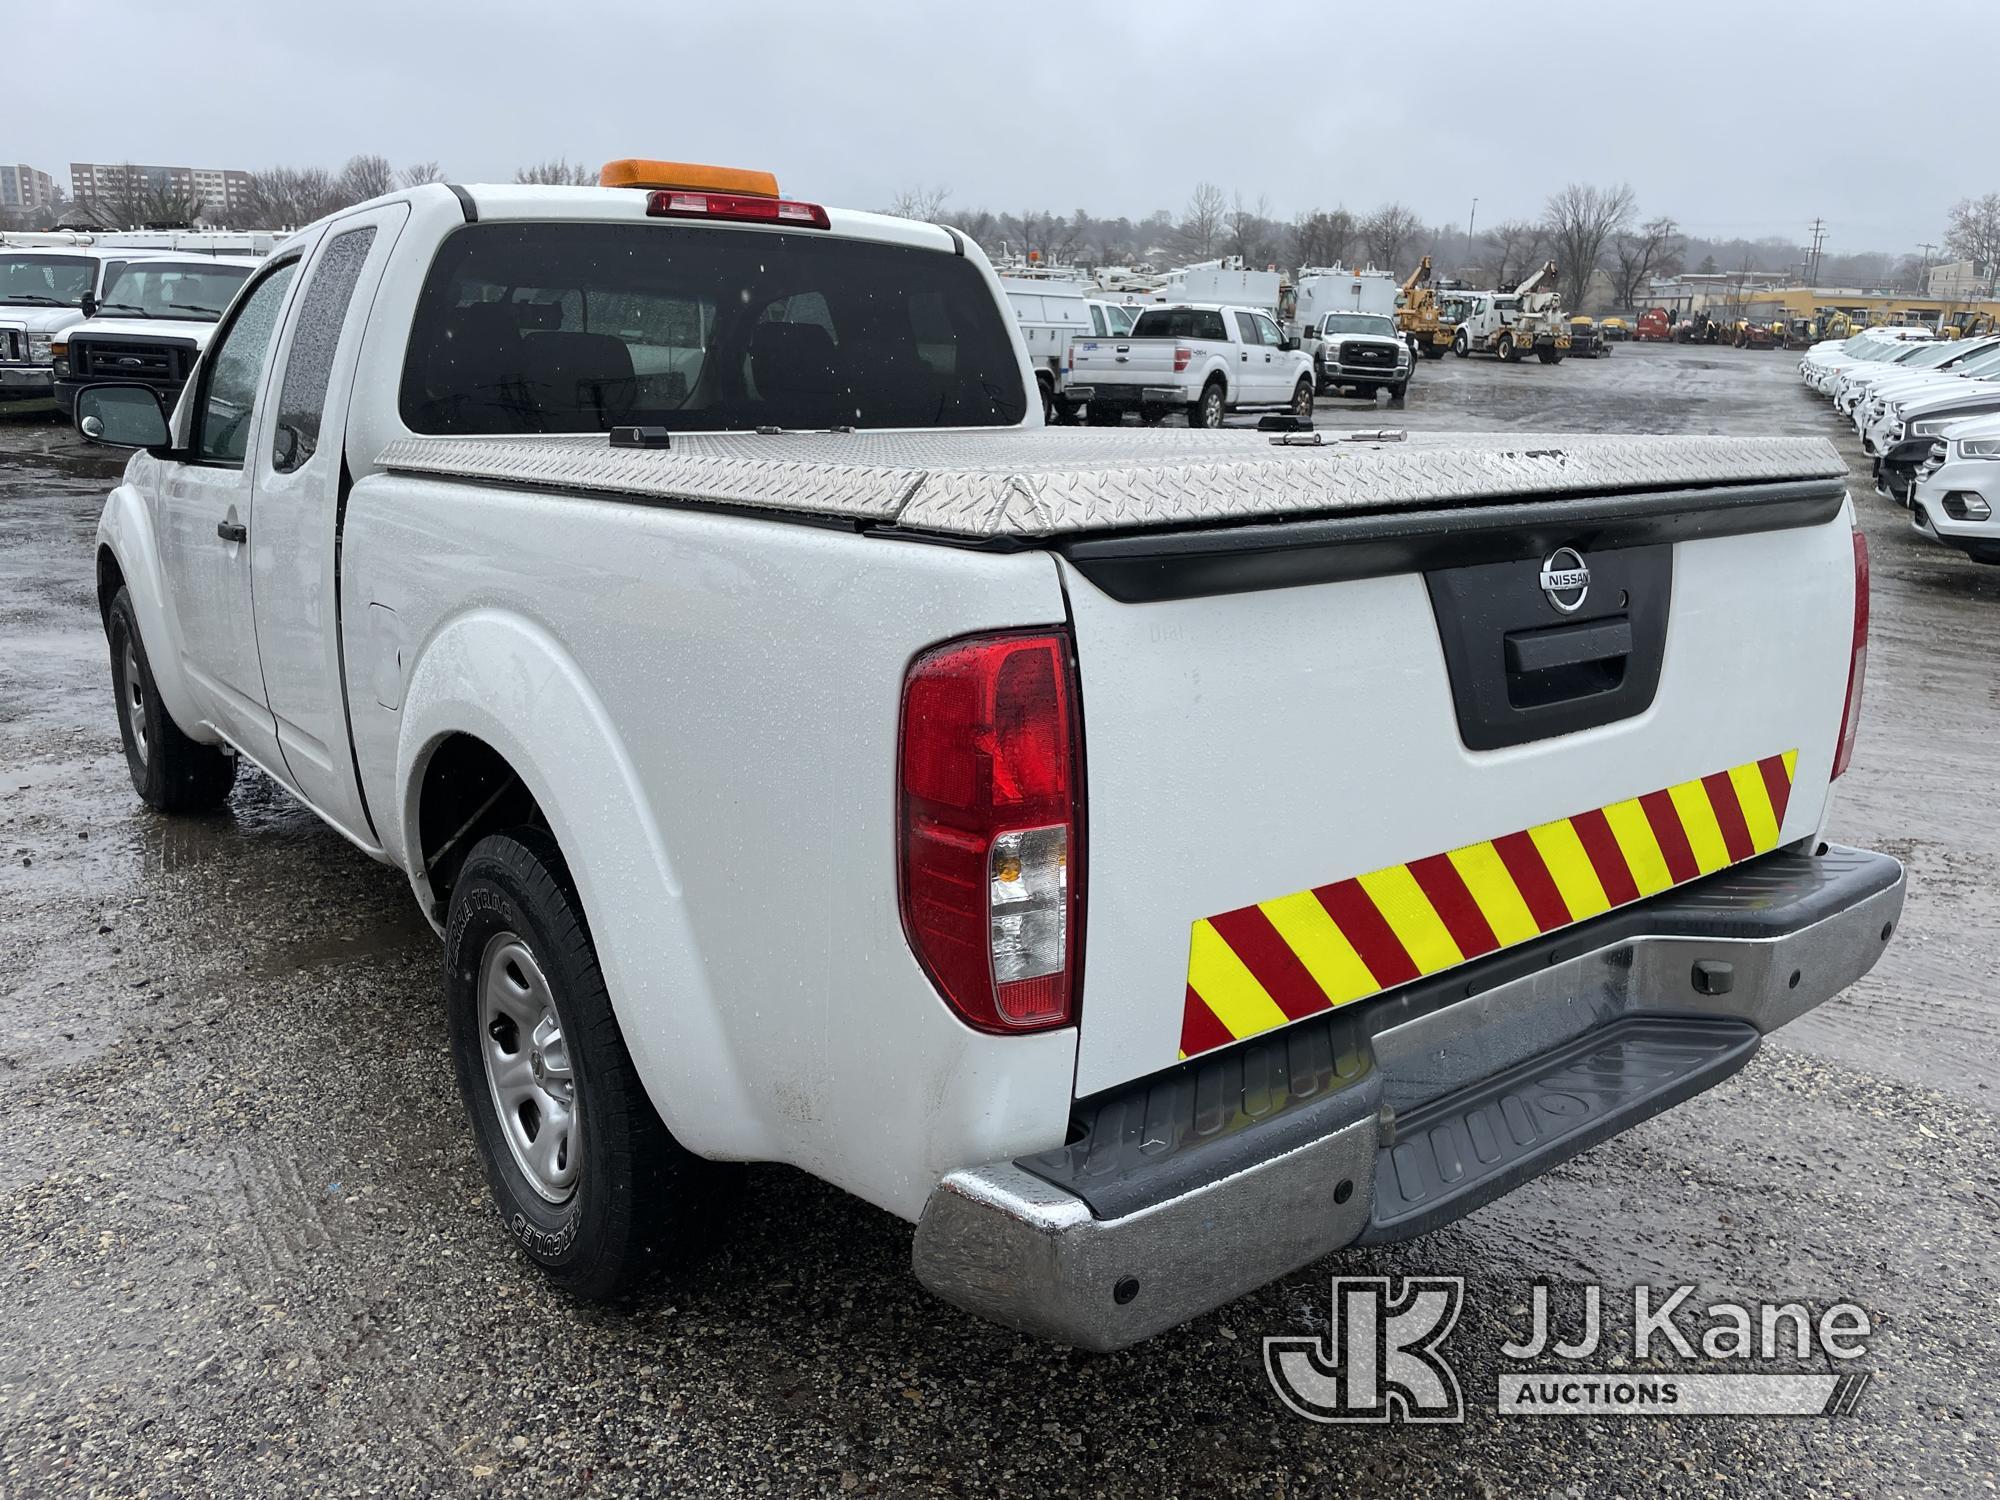 (Plymouth Meeting, PA) 2015 Nissan Frontier Extended-Cab Pickup Truck Runs & Moves, Body & Rust Dama